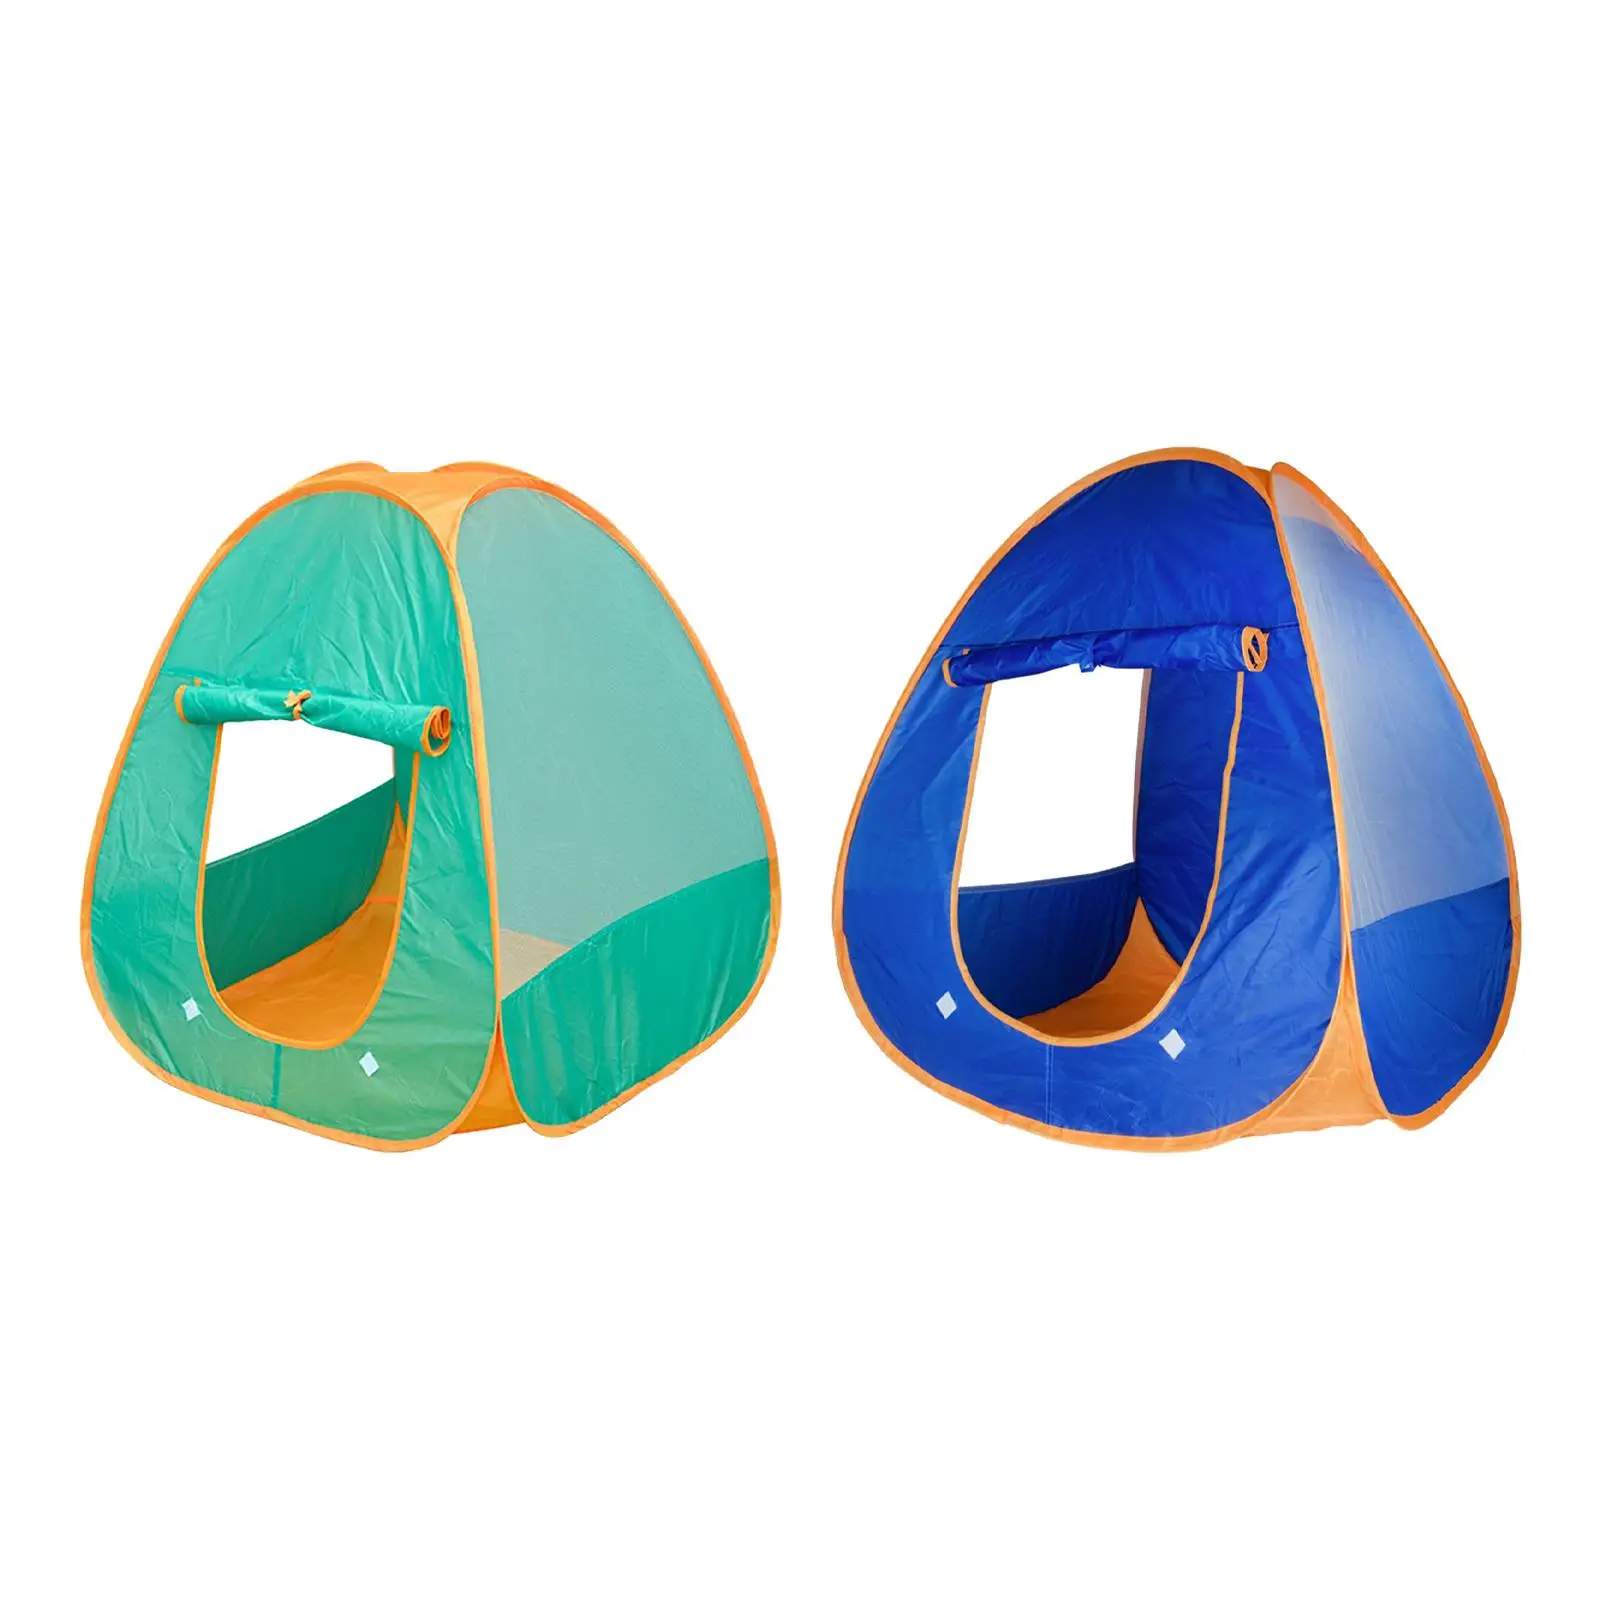 Kids Play Tent Collapsible Playhouse Toys for Parties Beach Indoor Outdoor